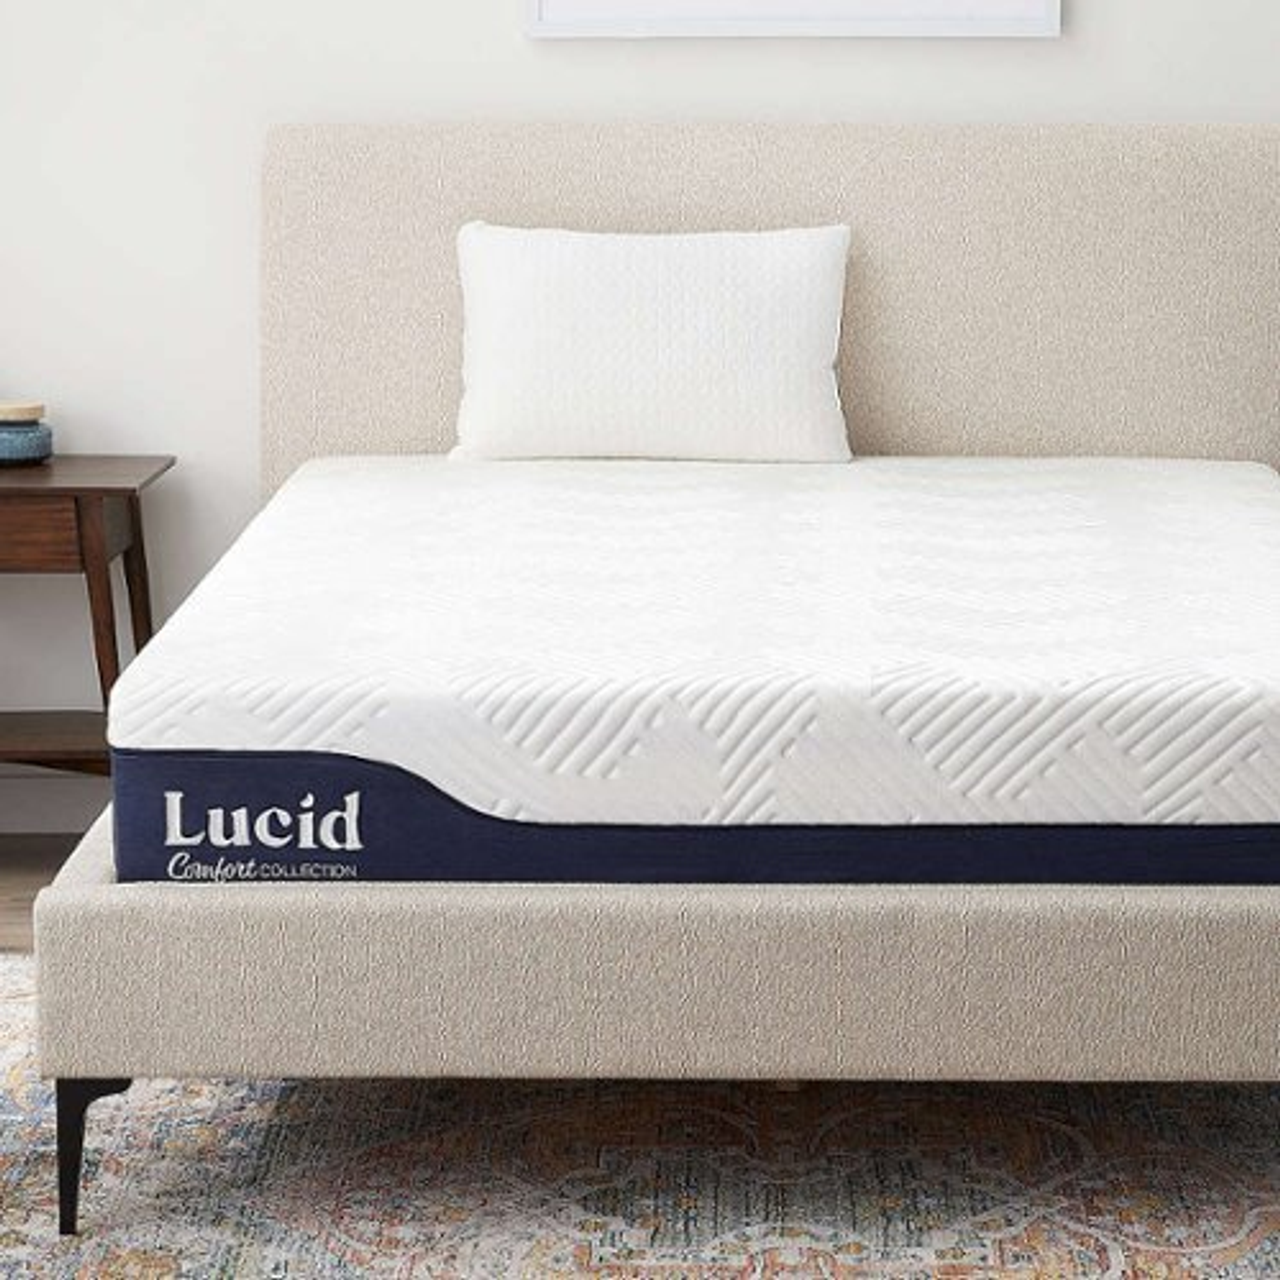 Lucid Comfort Collection - 10-inch Memory Foam Hybrid Mattress - Cal King - White